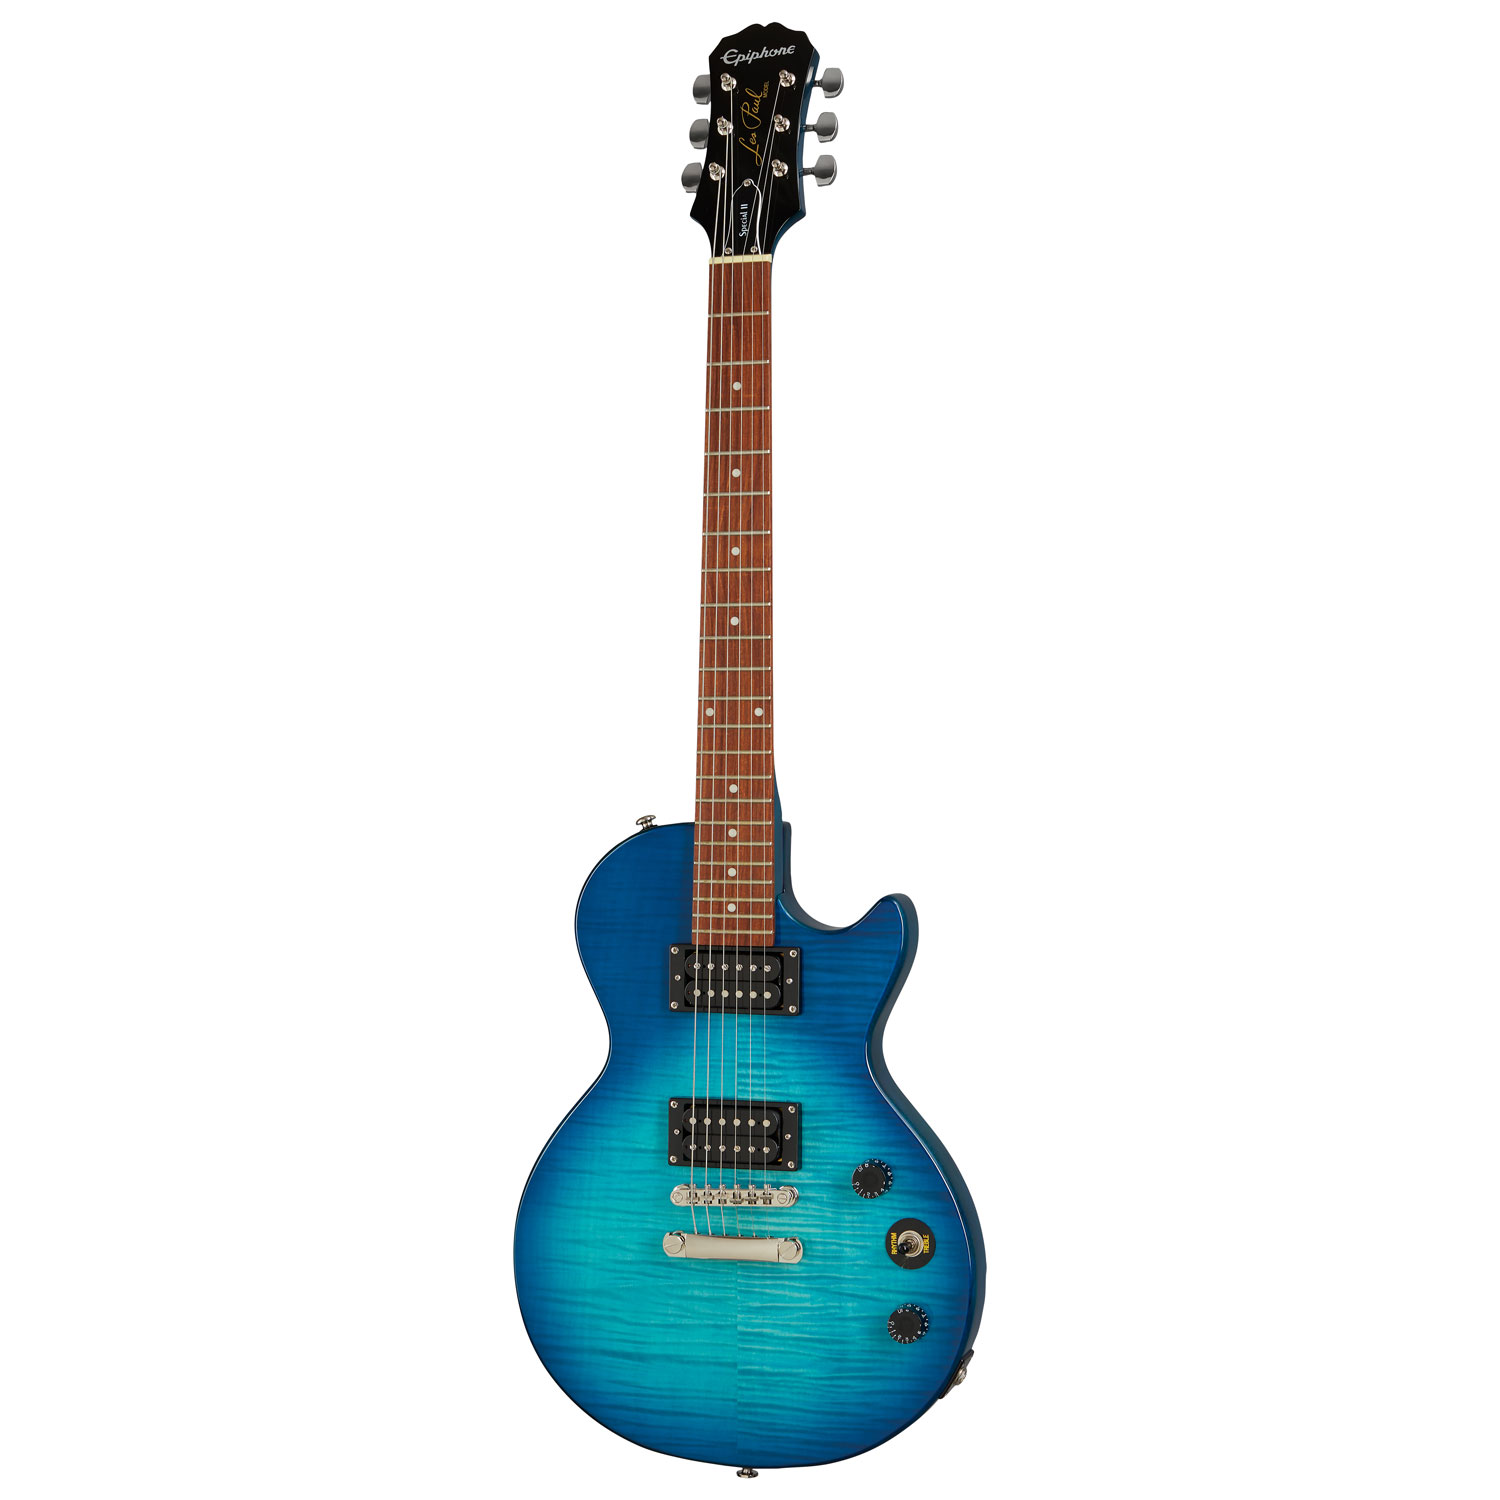 Epiphone Les Paul Special II Plus Top LE Electric Guitar (ENS2TLNH3) - Trans Blue - Only at Best Buy